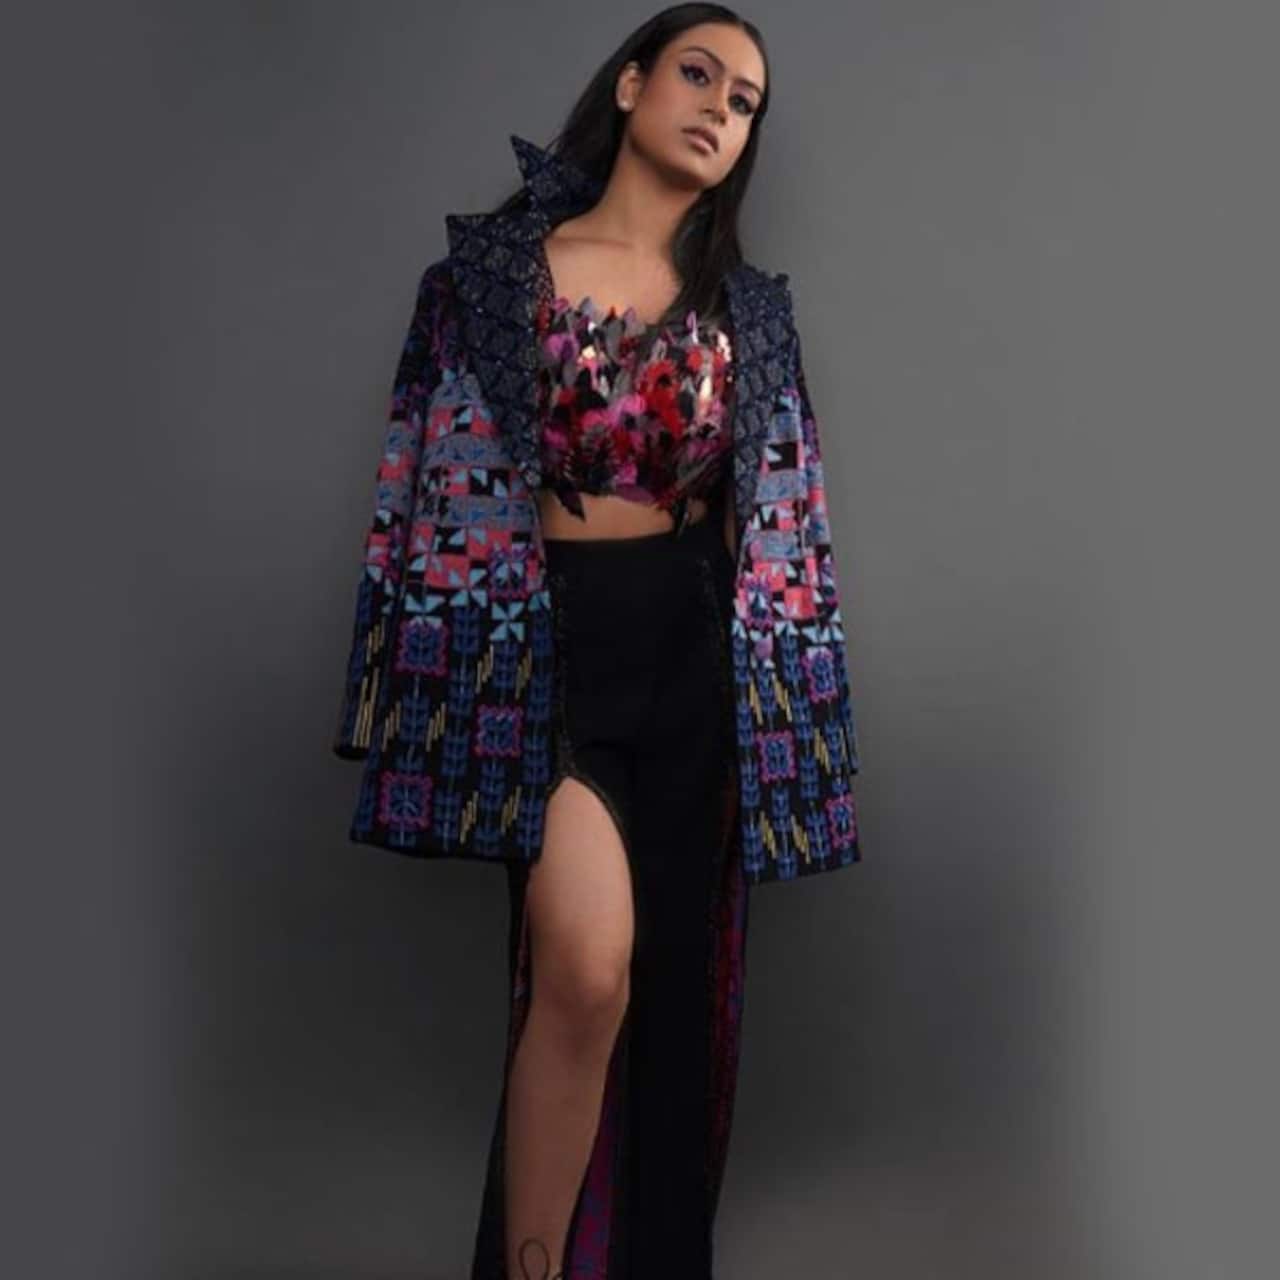 Nysa Devgn looks super-hot in a crop top and thigh-high slit skirt